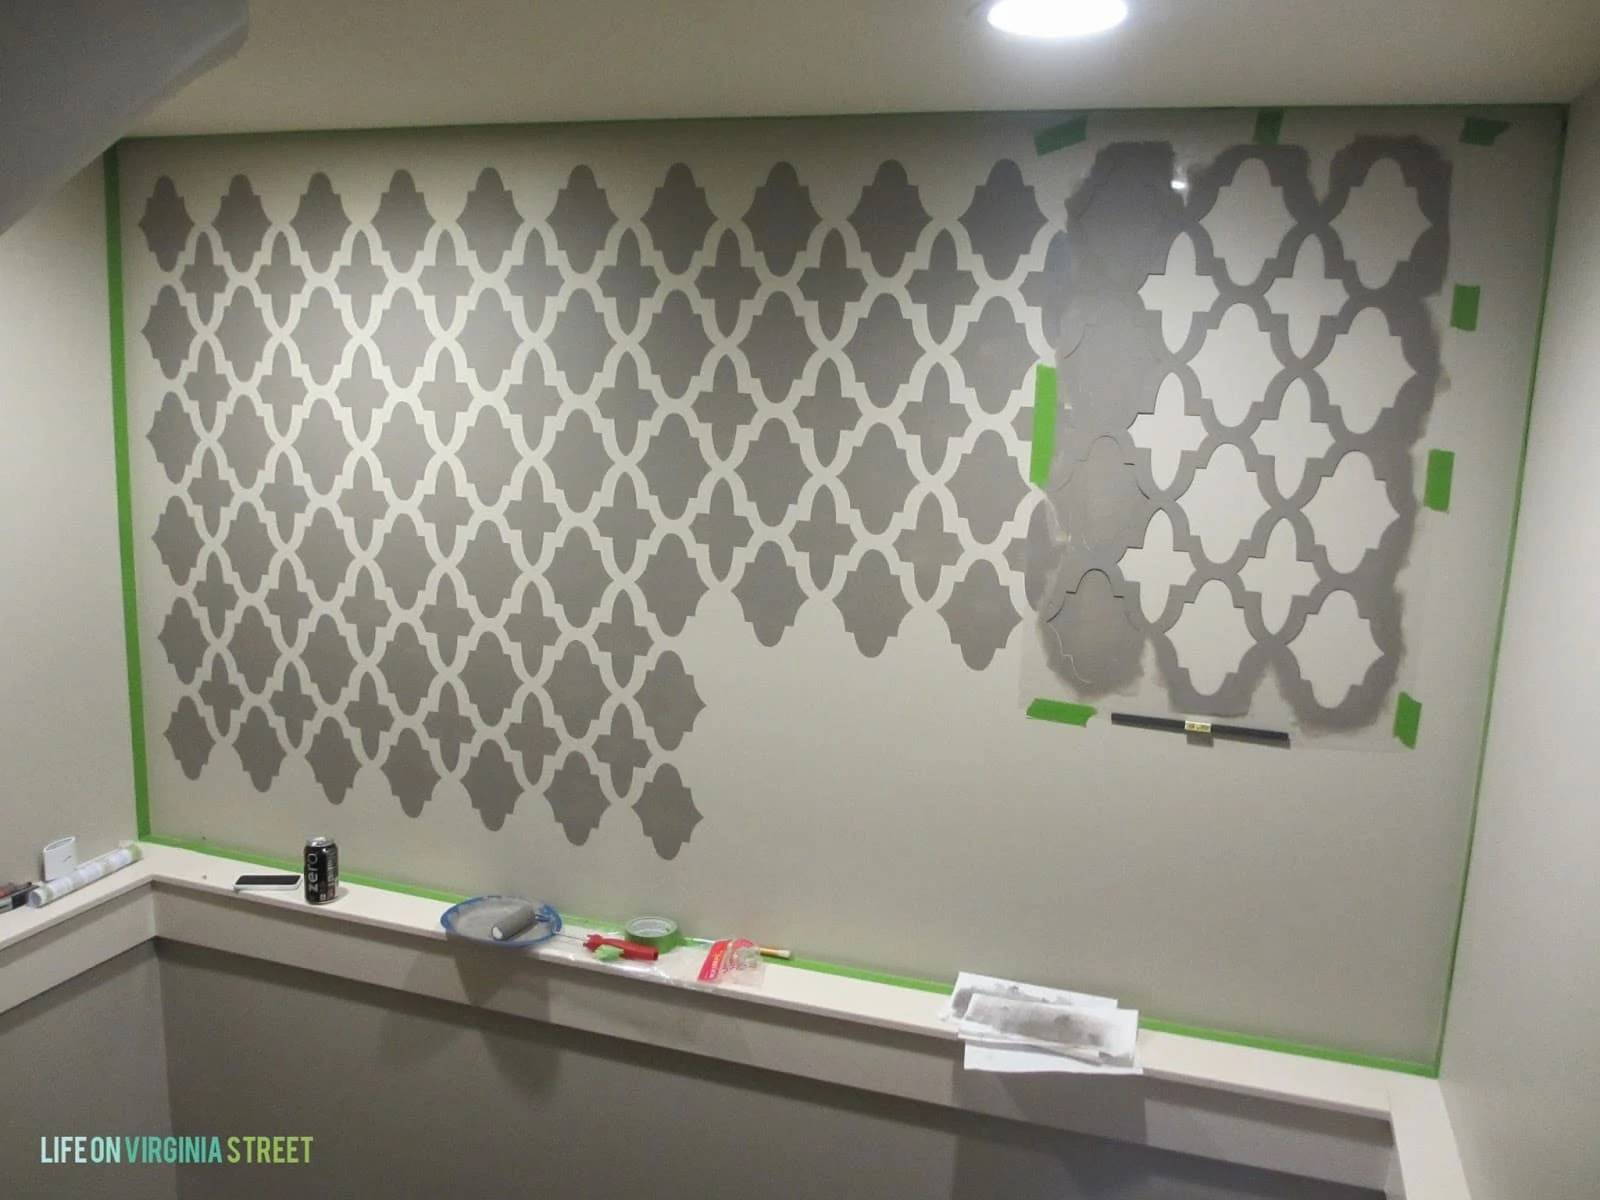 Painting the stencils on the wall in a grey color.